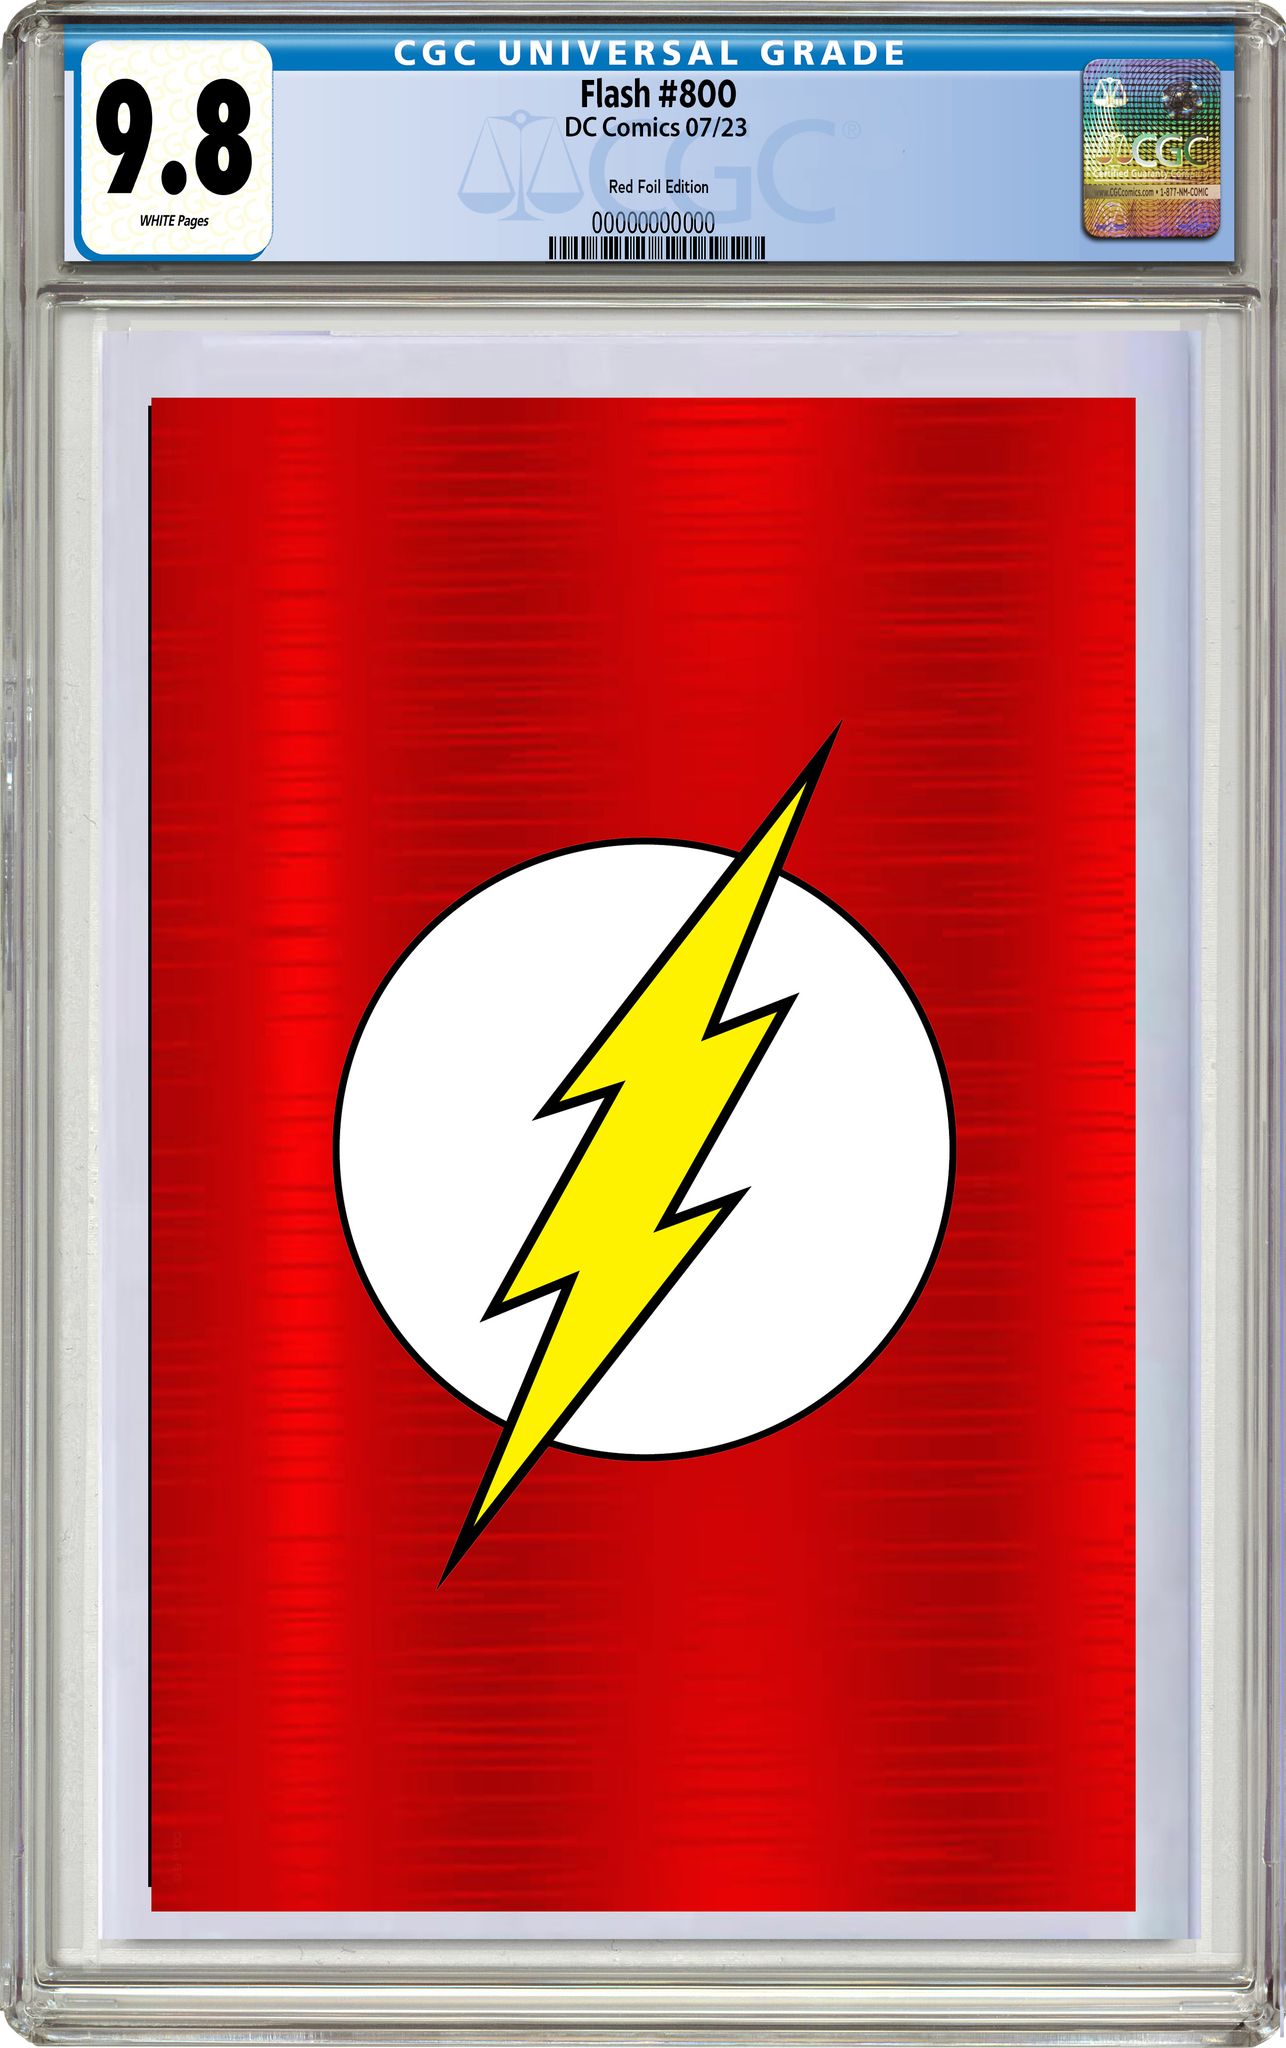 FLASH #800 EXCLUSIVE RED FOIL EDITION OPTIONS